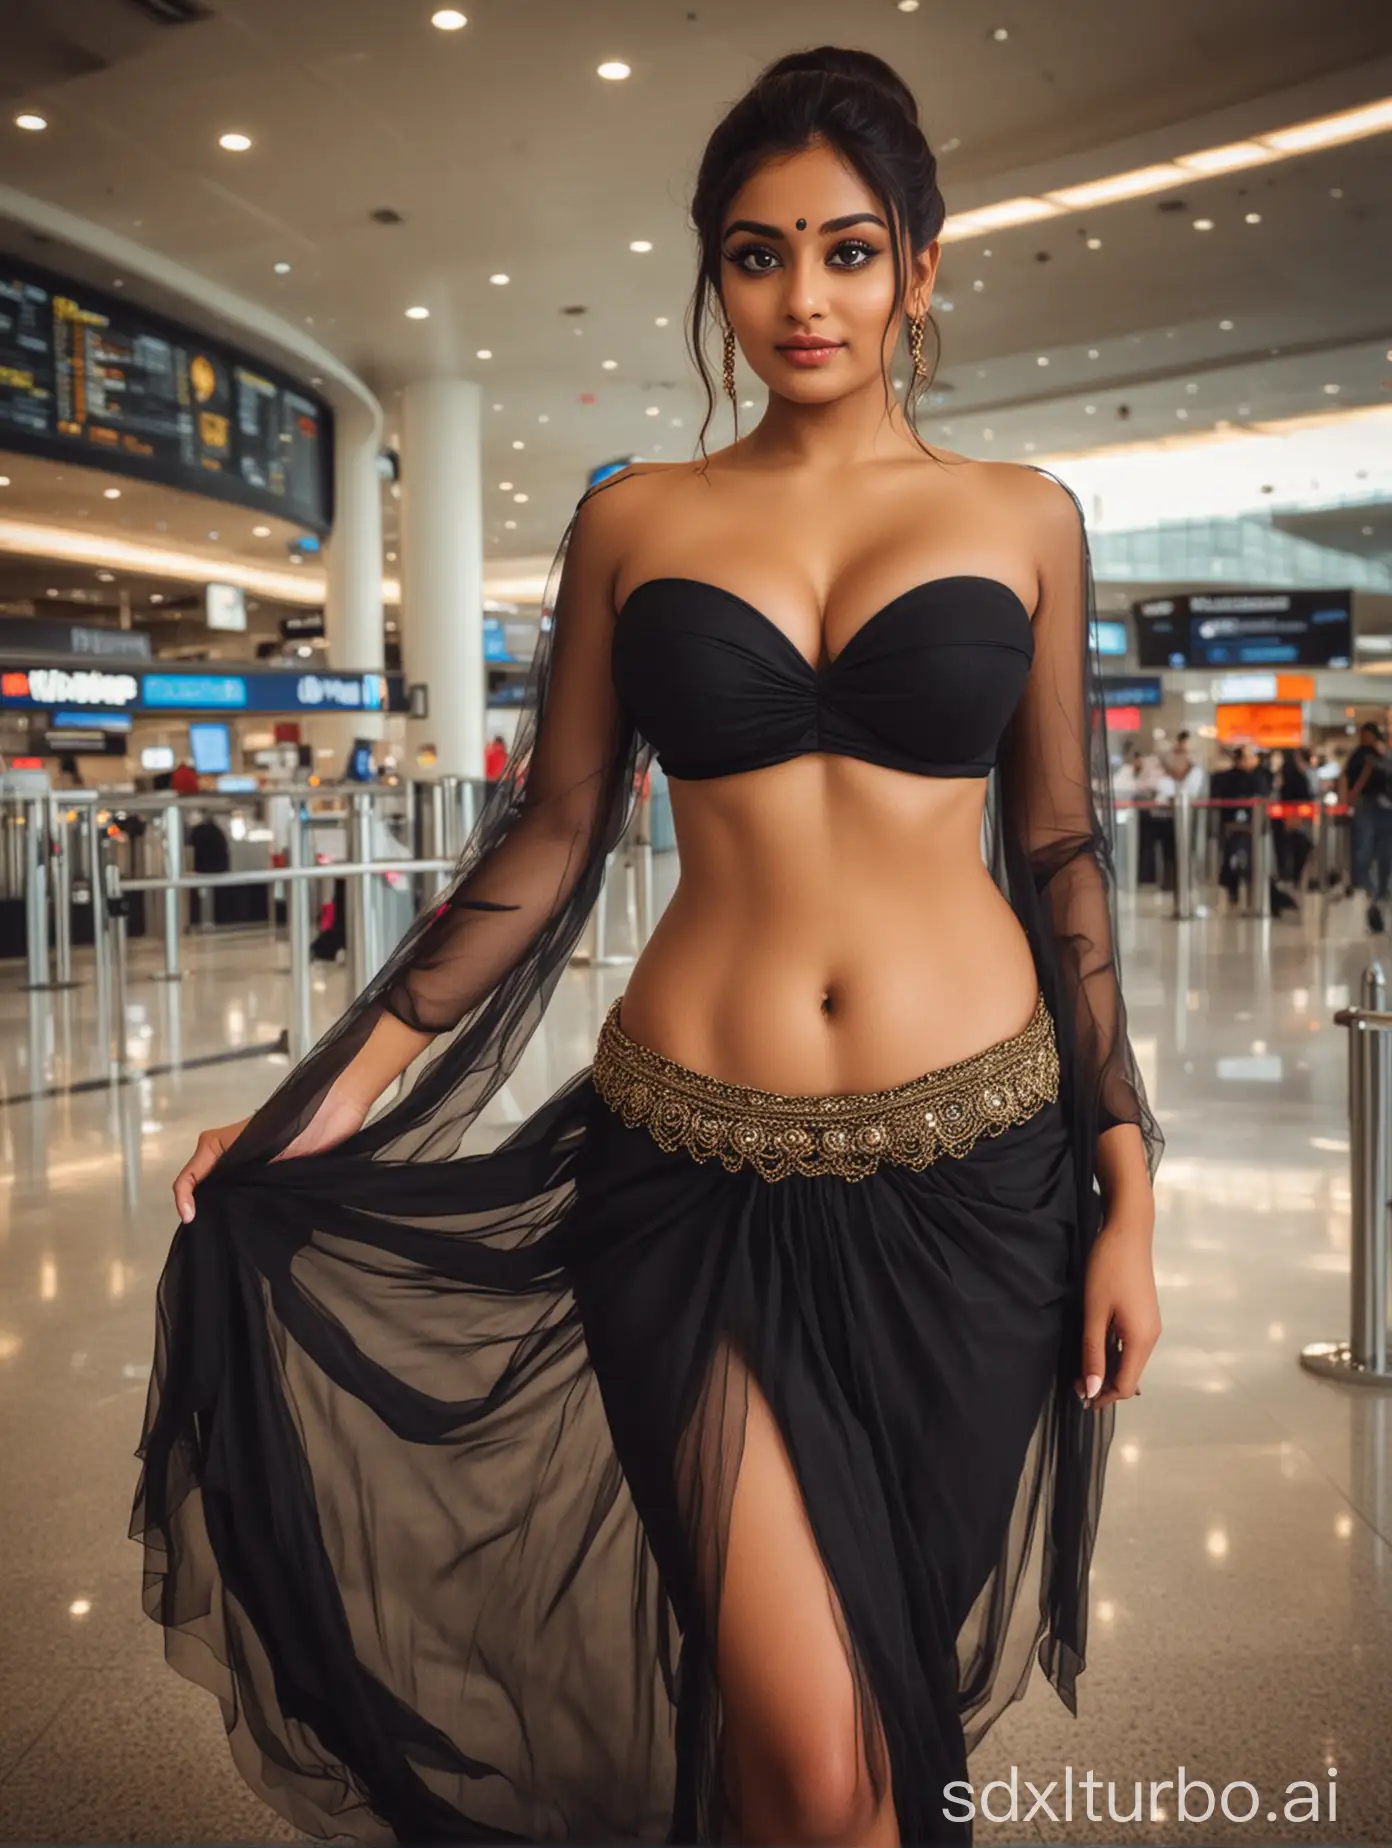 curvy Indian woman standing in the airport with enormous breasts. Hair dressed in a bun, she is wearing a strapless, tight, transparent black lengha suit that highlights her deep V-neck cleavage. She has big eyes, perfect wine-red eyes, a fantastic face and beautiful demeanor. With a plump figure and a voluptuous body, she showcases an incredibly deep V-neck cleavage. Her hair is styled in loose waves. Full-body view from head to knee is visible.